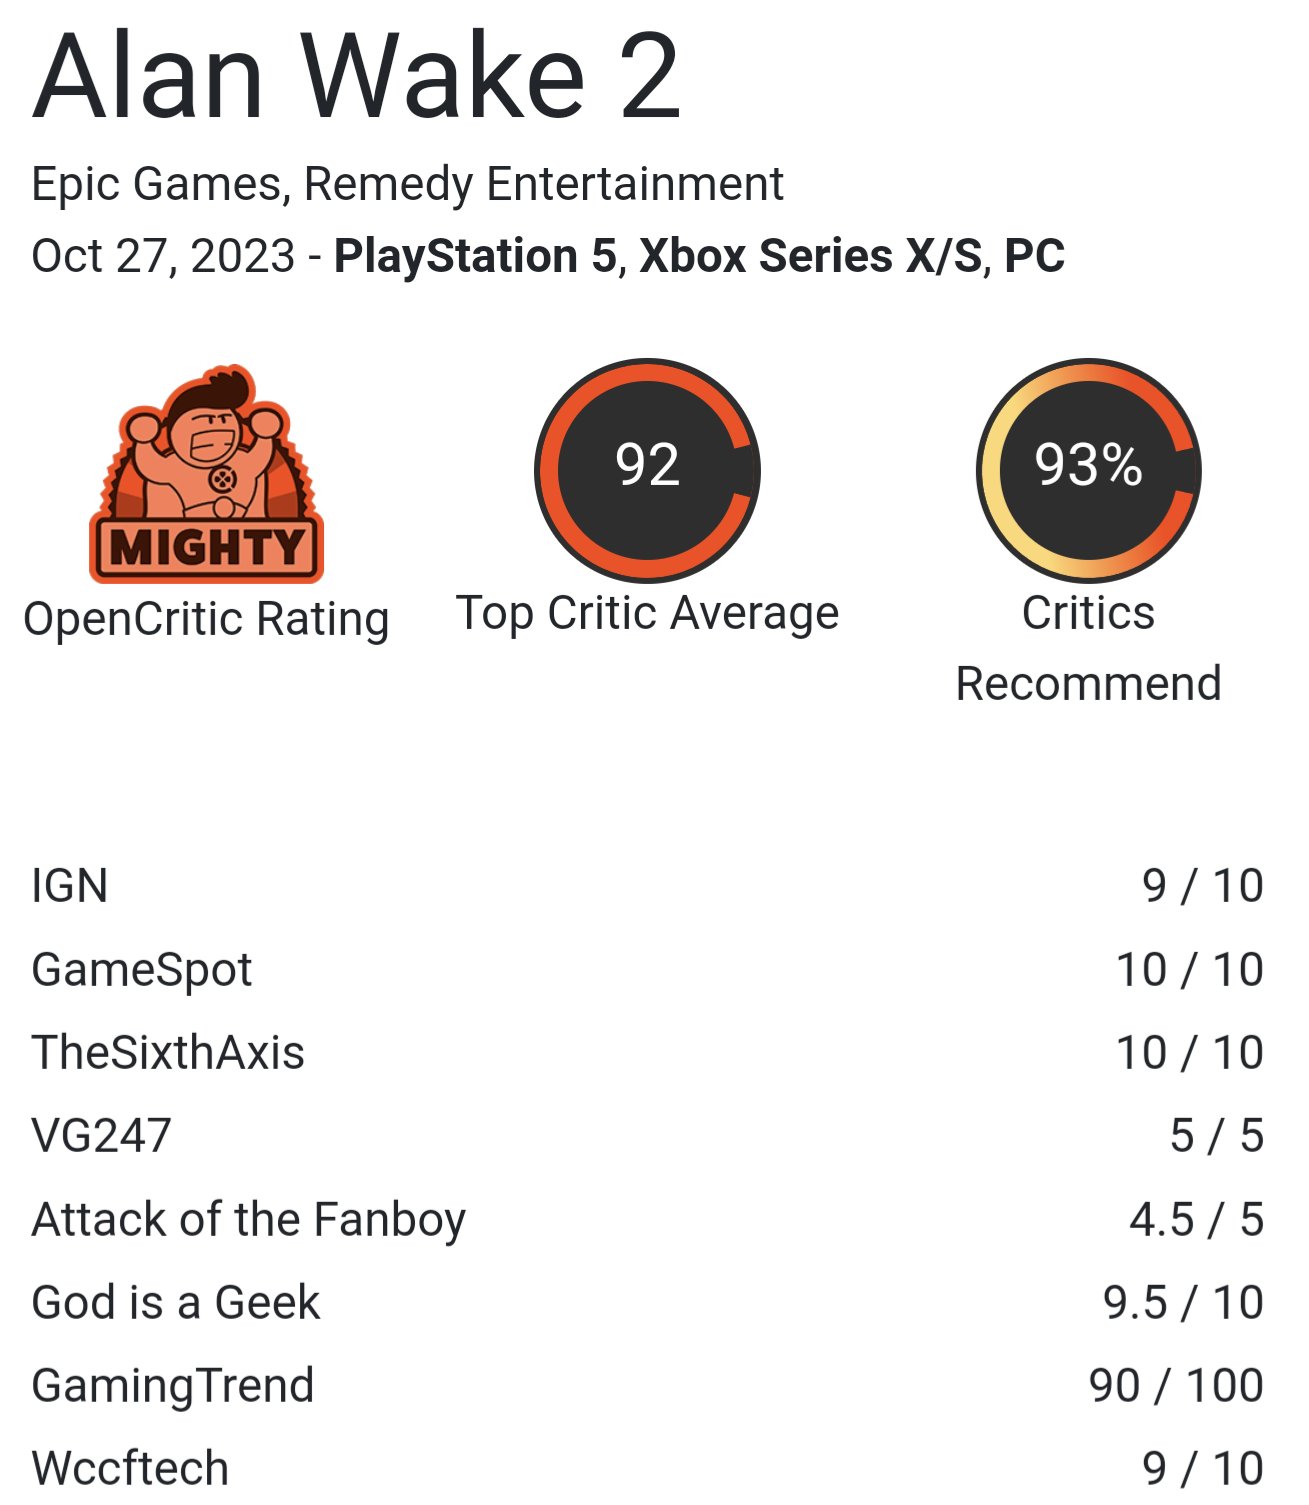 What Review Score Would You Give Alan Wake 2?